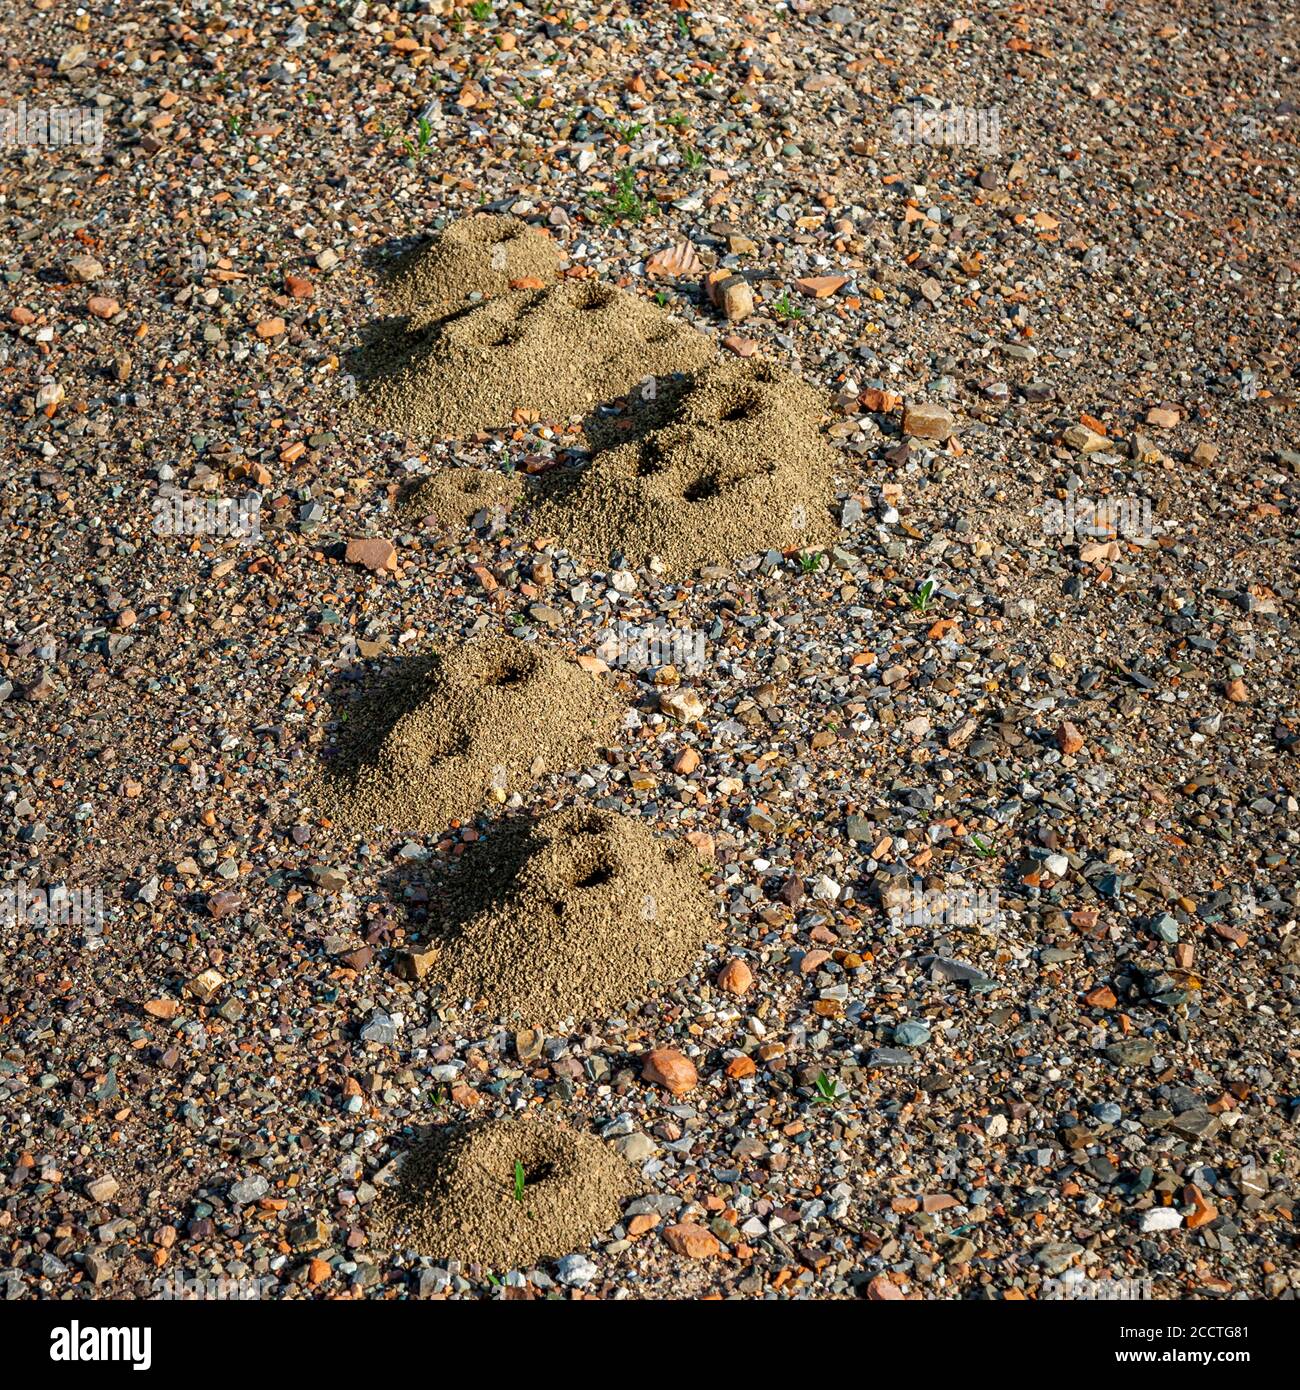 Ant nest in gravel Val d'Orcia, Italy Stock Photo